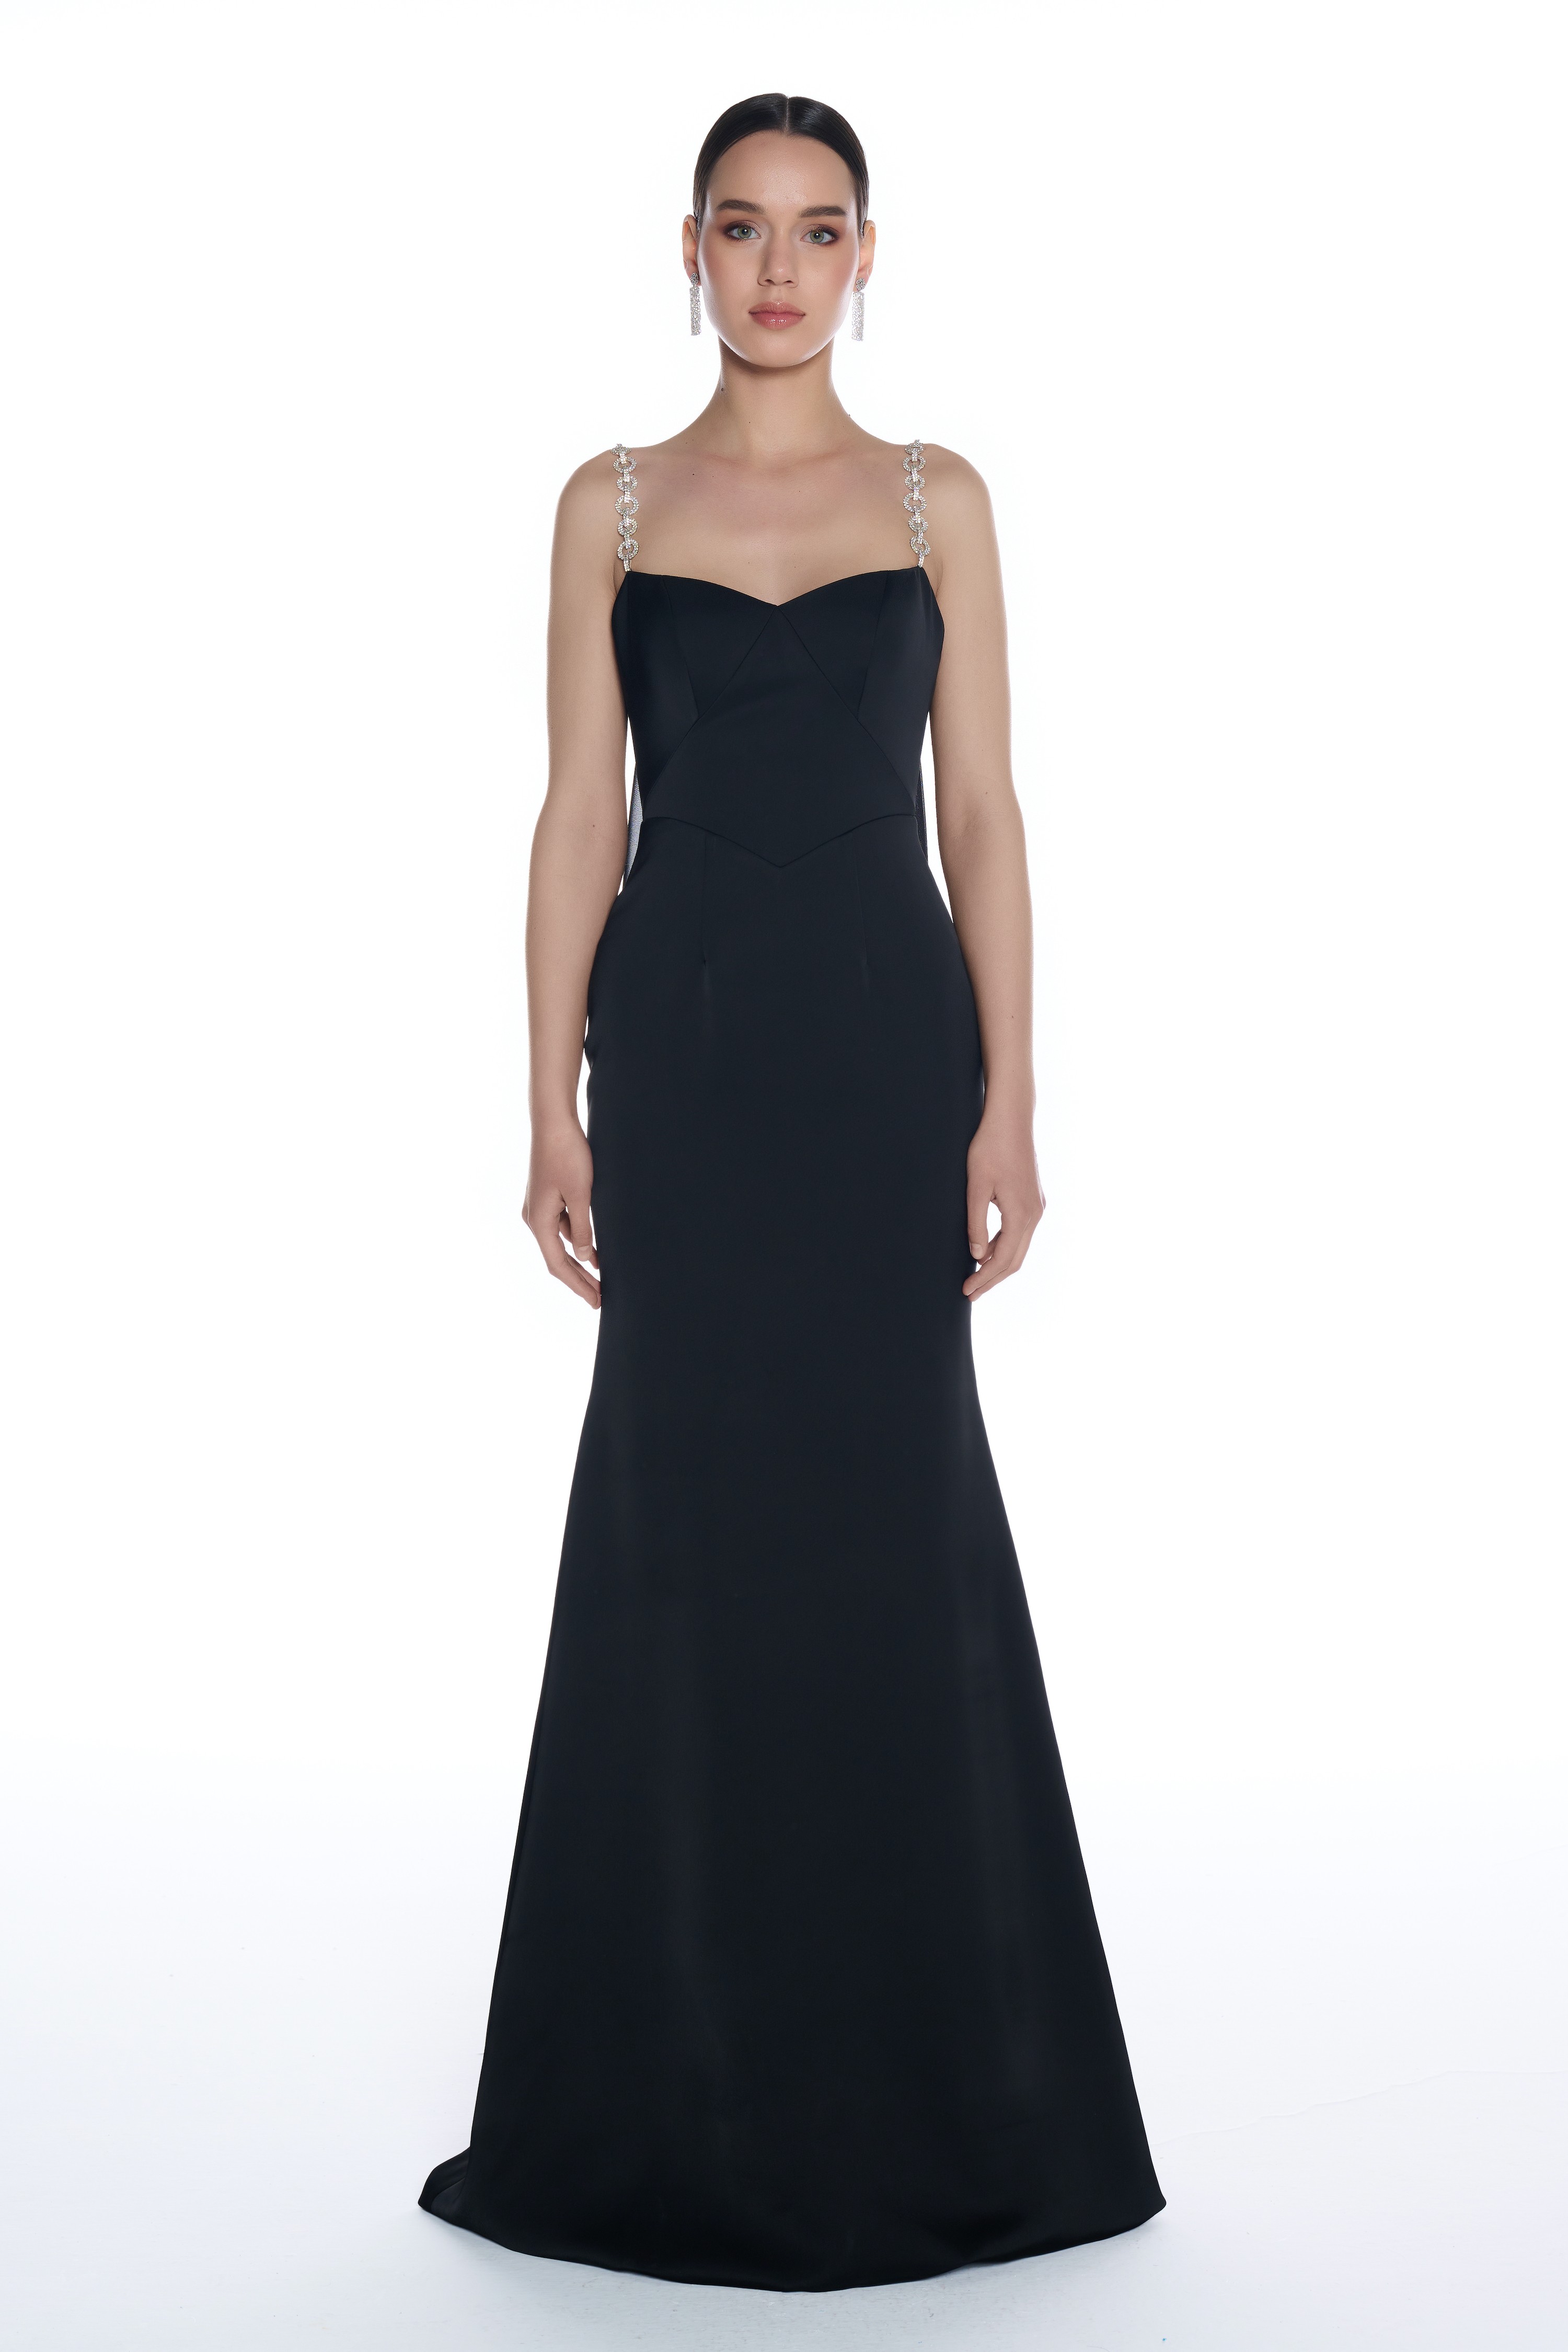 R09 - Chain Strap with Shoulder Embellishment, Low Back with Deep V-Neckline, Chiffon Train with Mermaid Cut, Long Dress